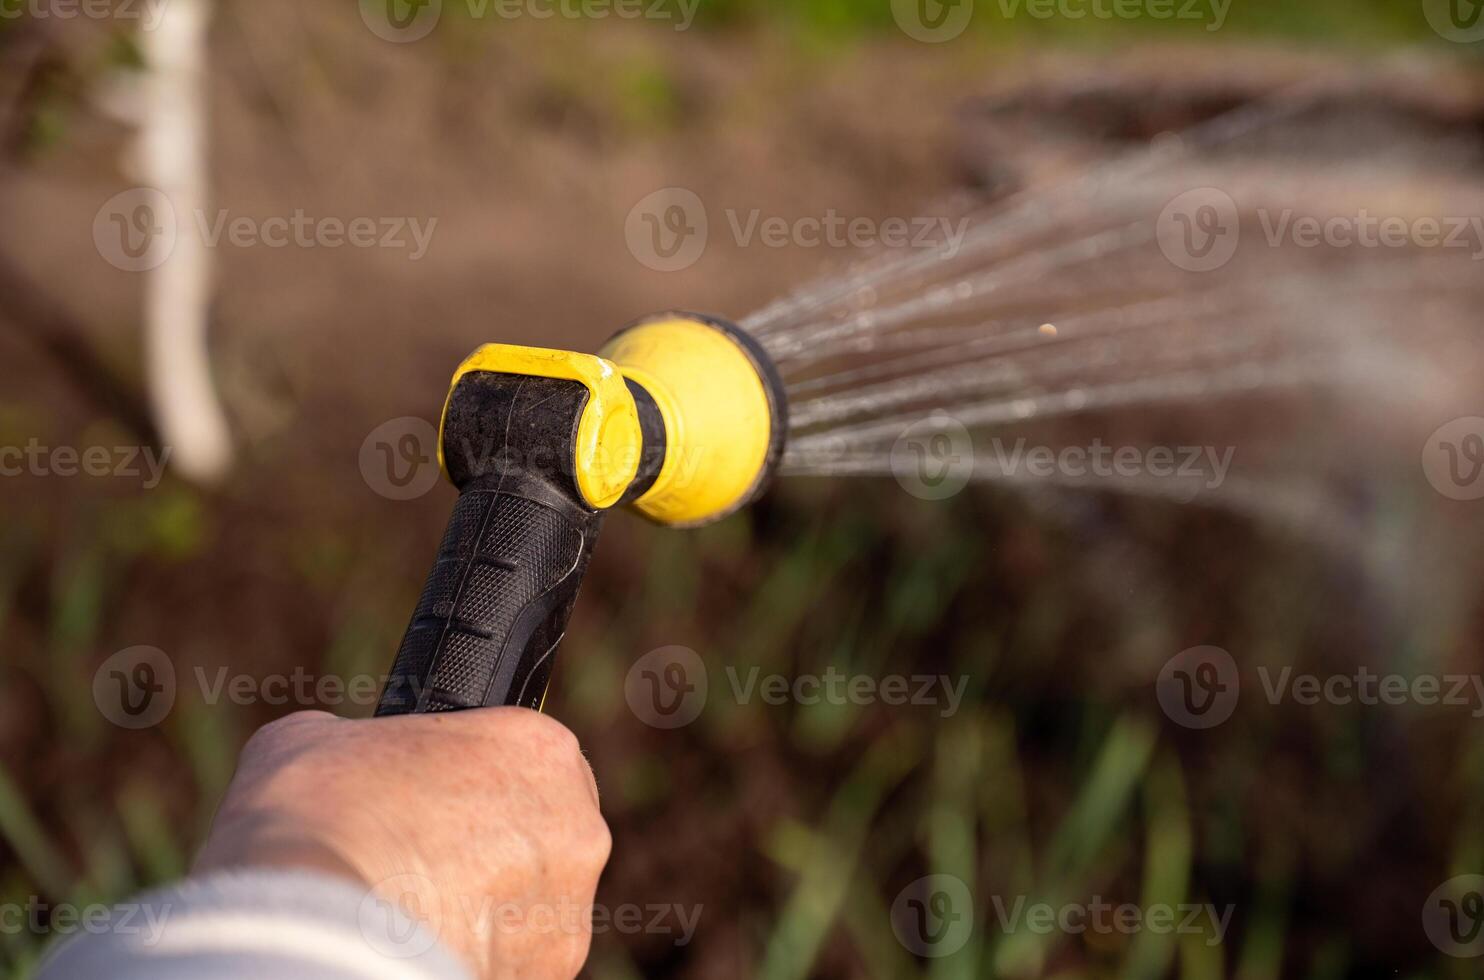 Spring watering of vegetable garden from a sprinkler, close-up, selective focus photo